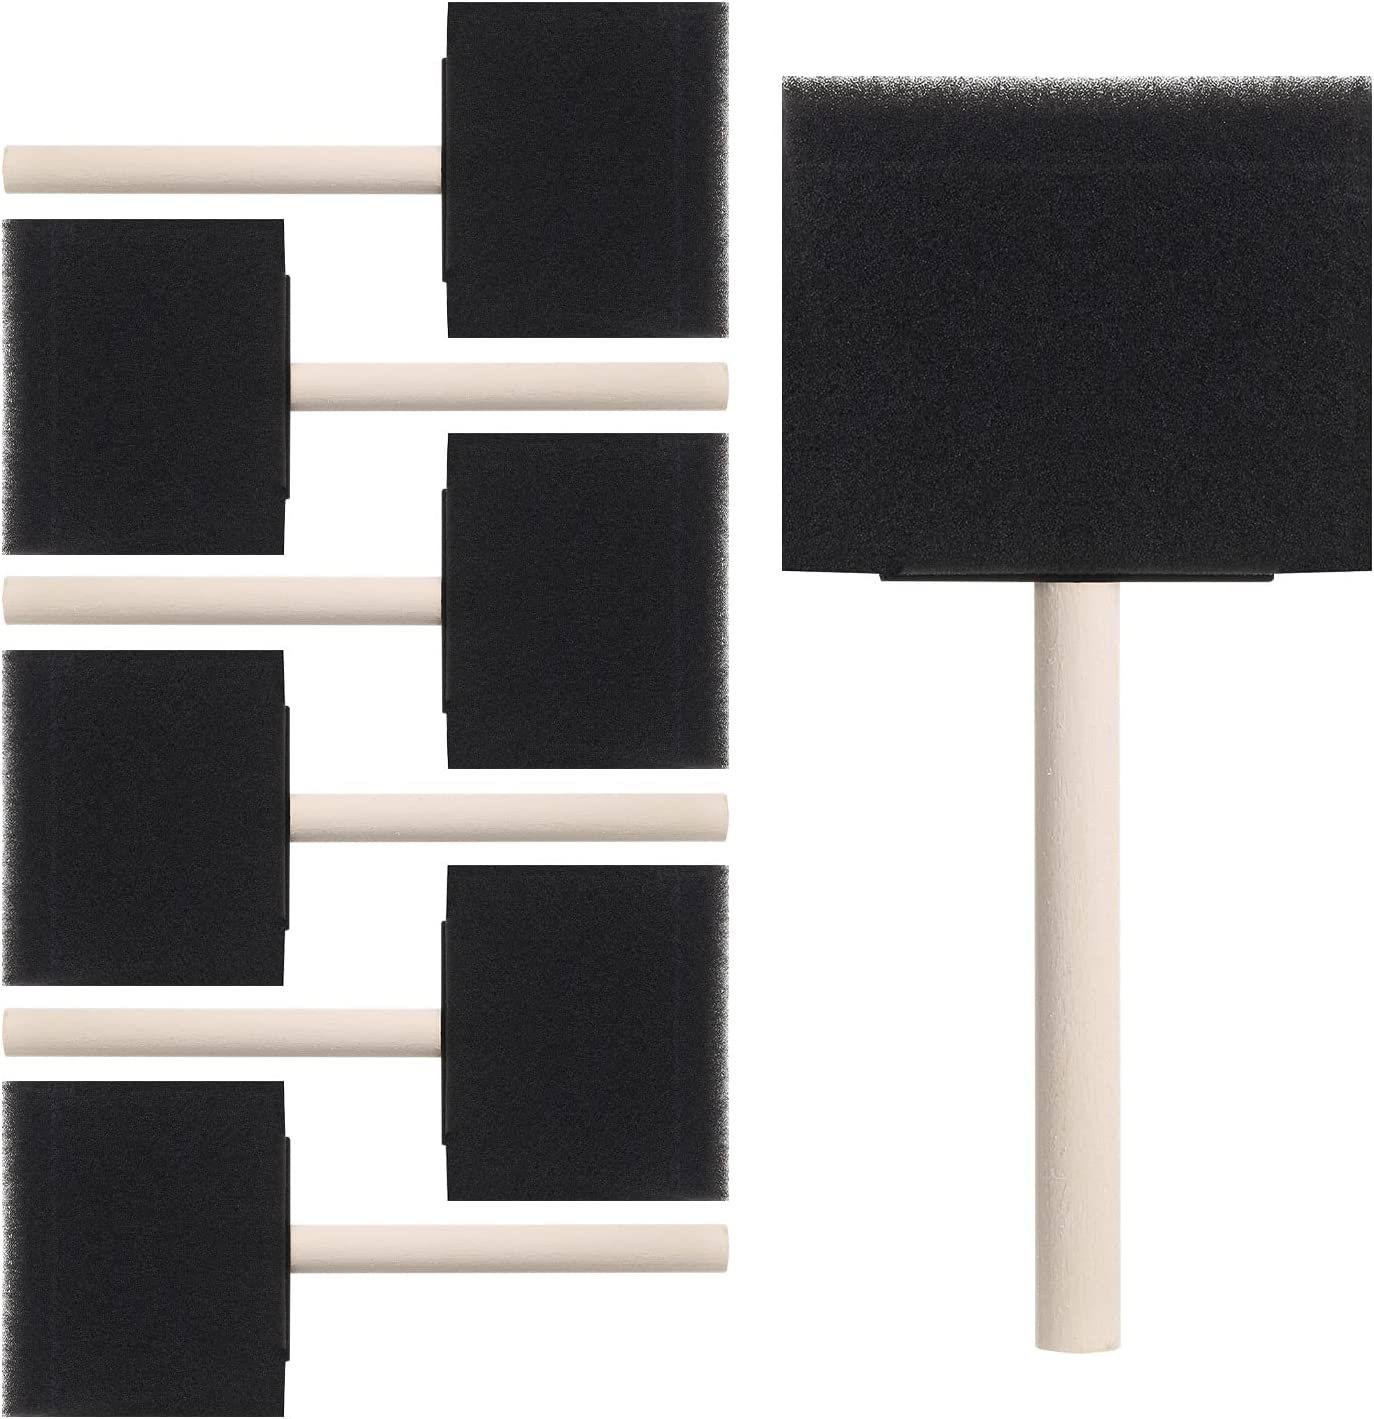 2 Inch Foam Sponge Brush with Wooden Handle (40 Pack!)